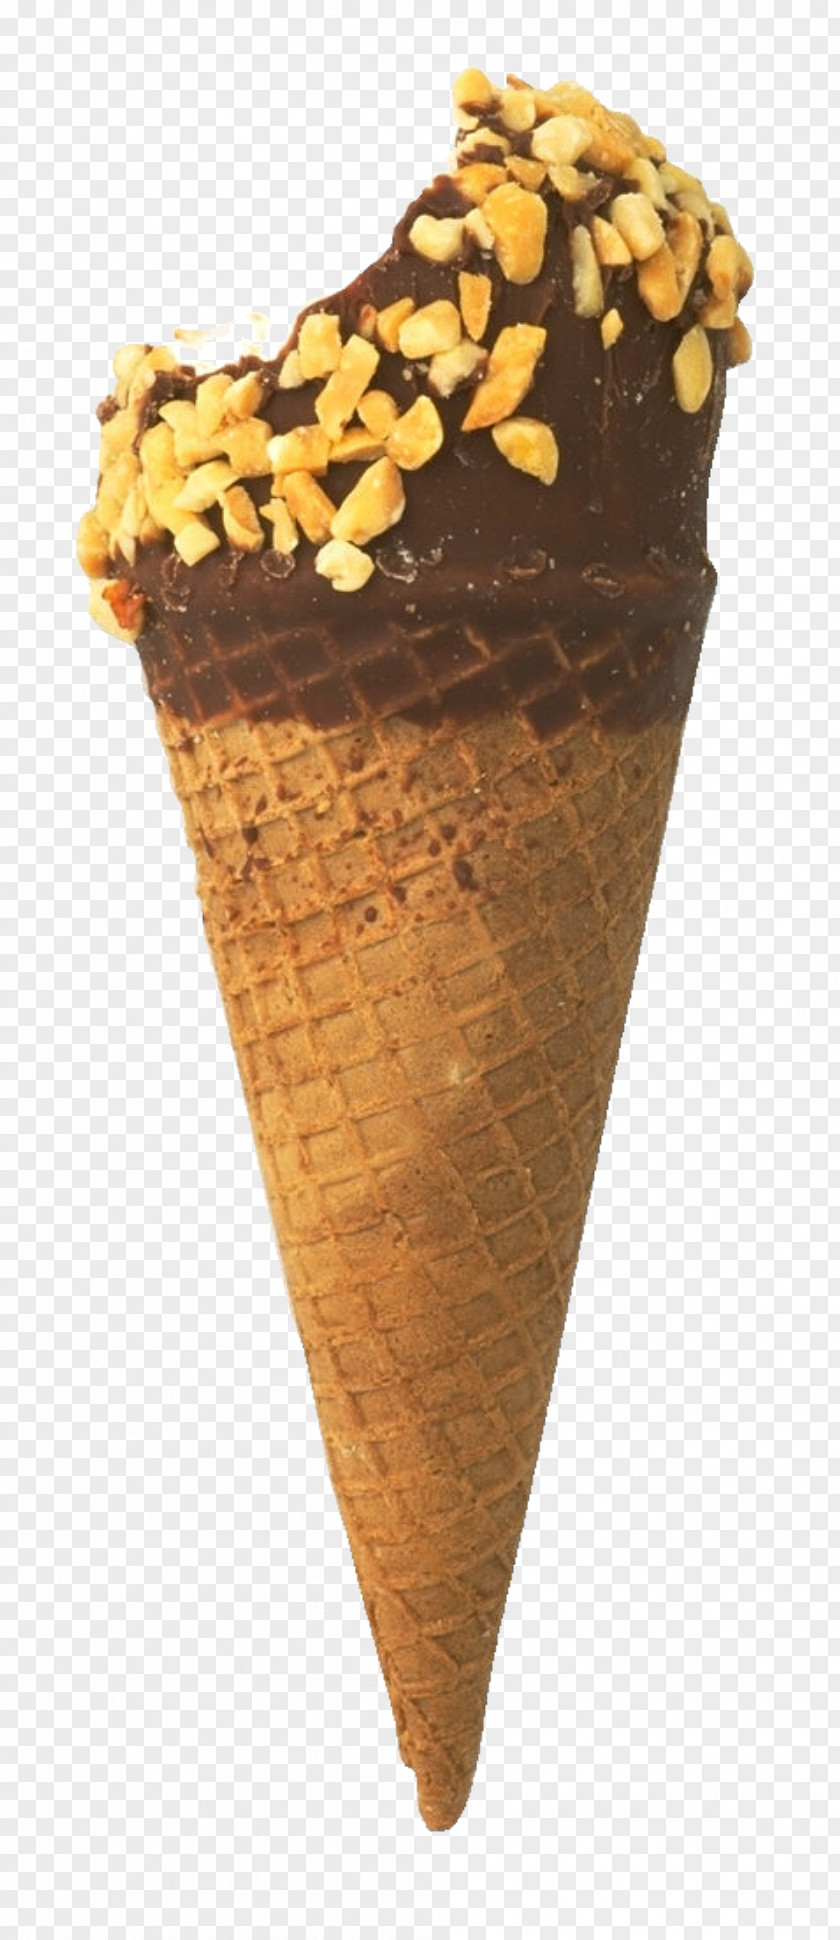 Chocolate Ice Cream Cone Pastry PNG